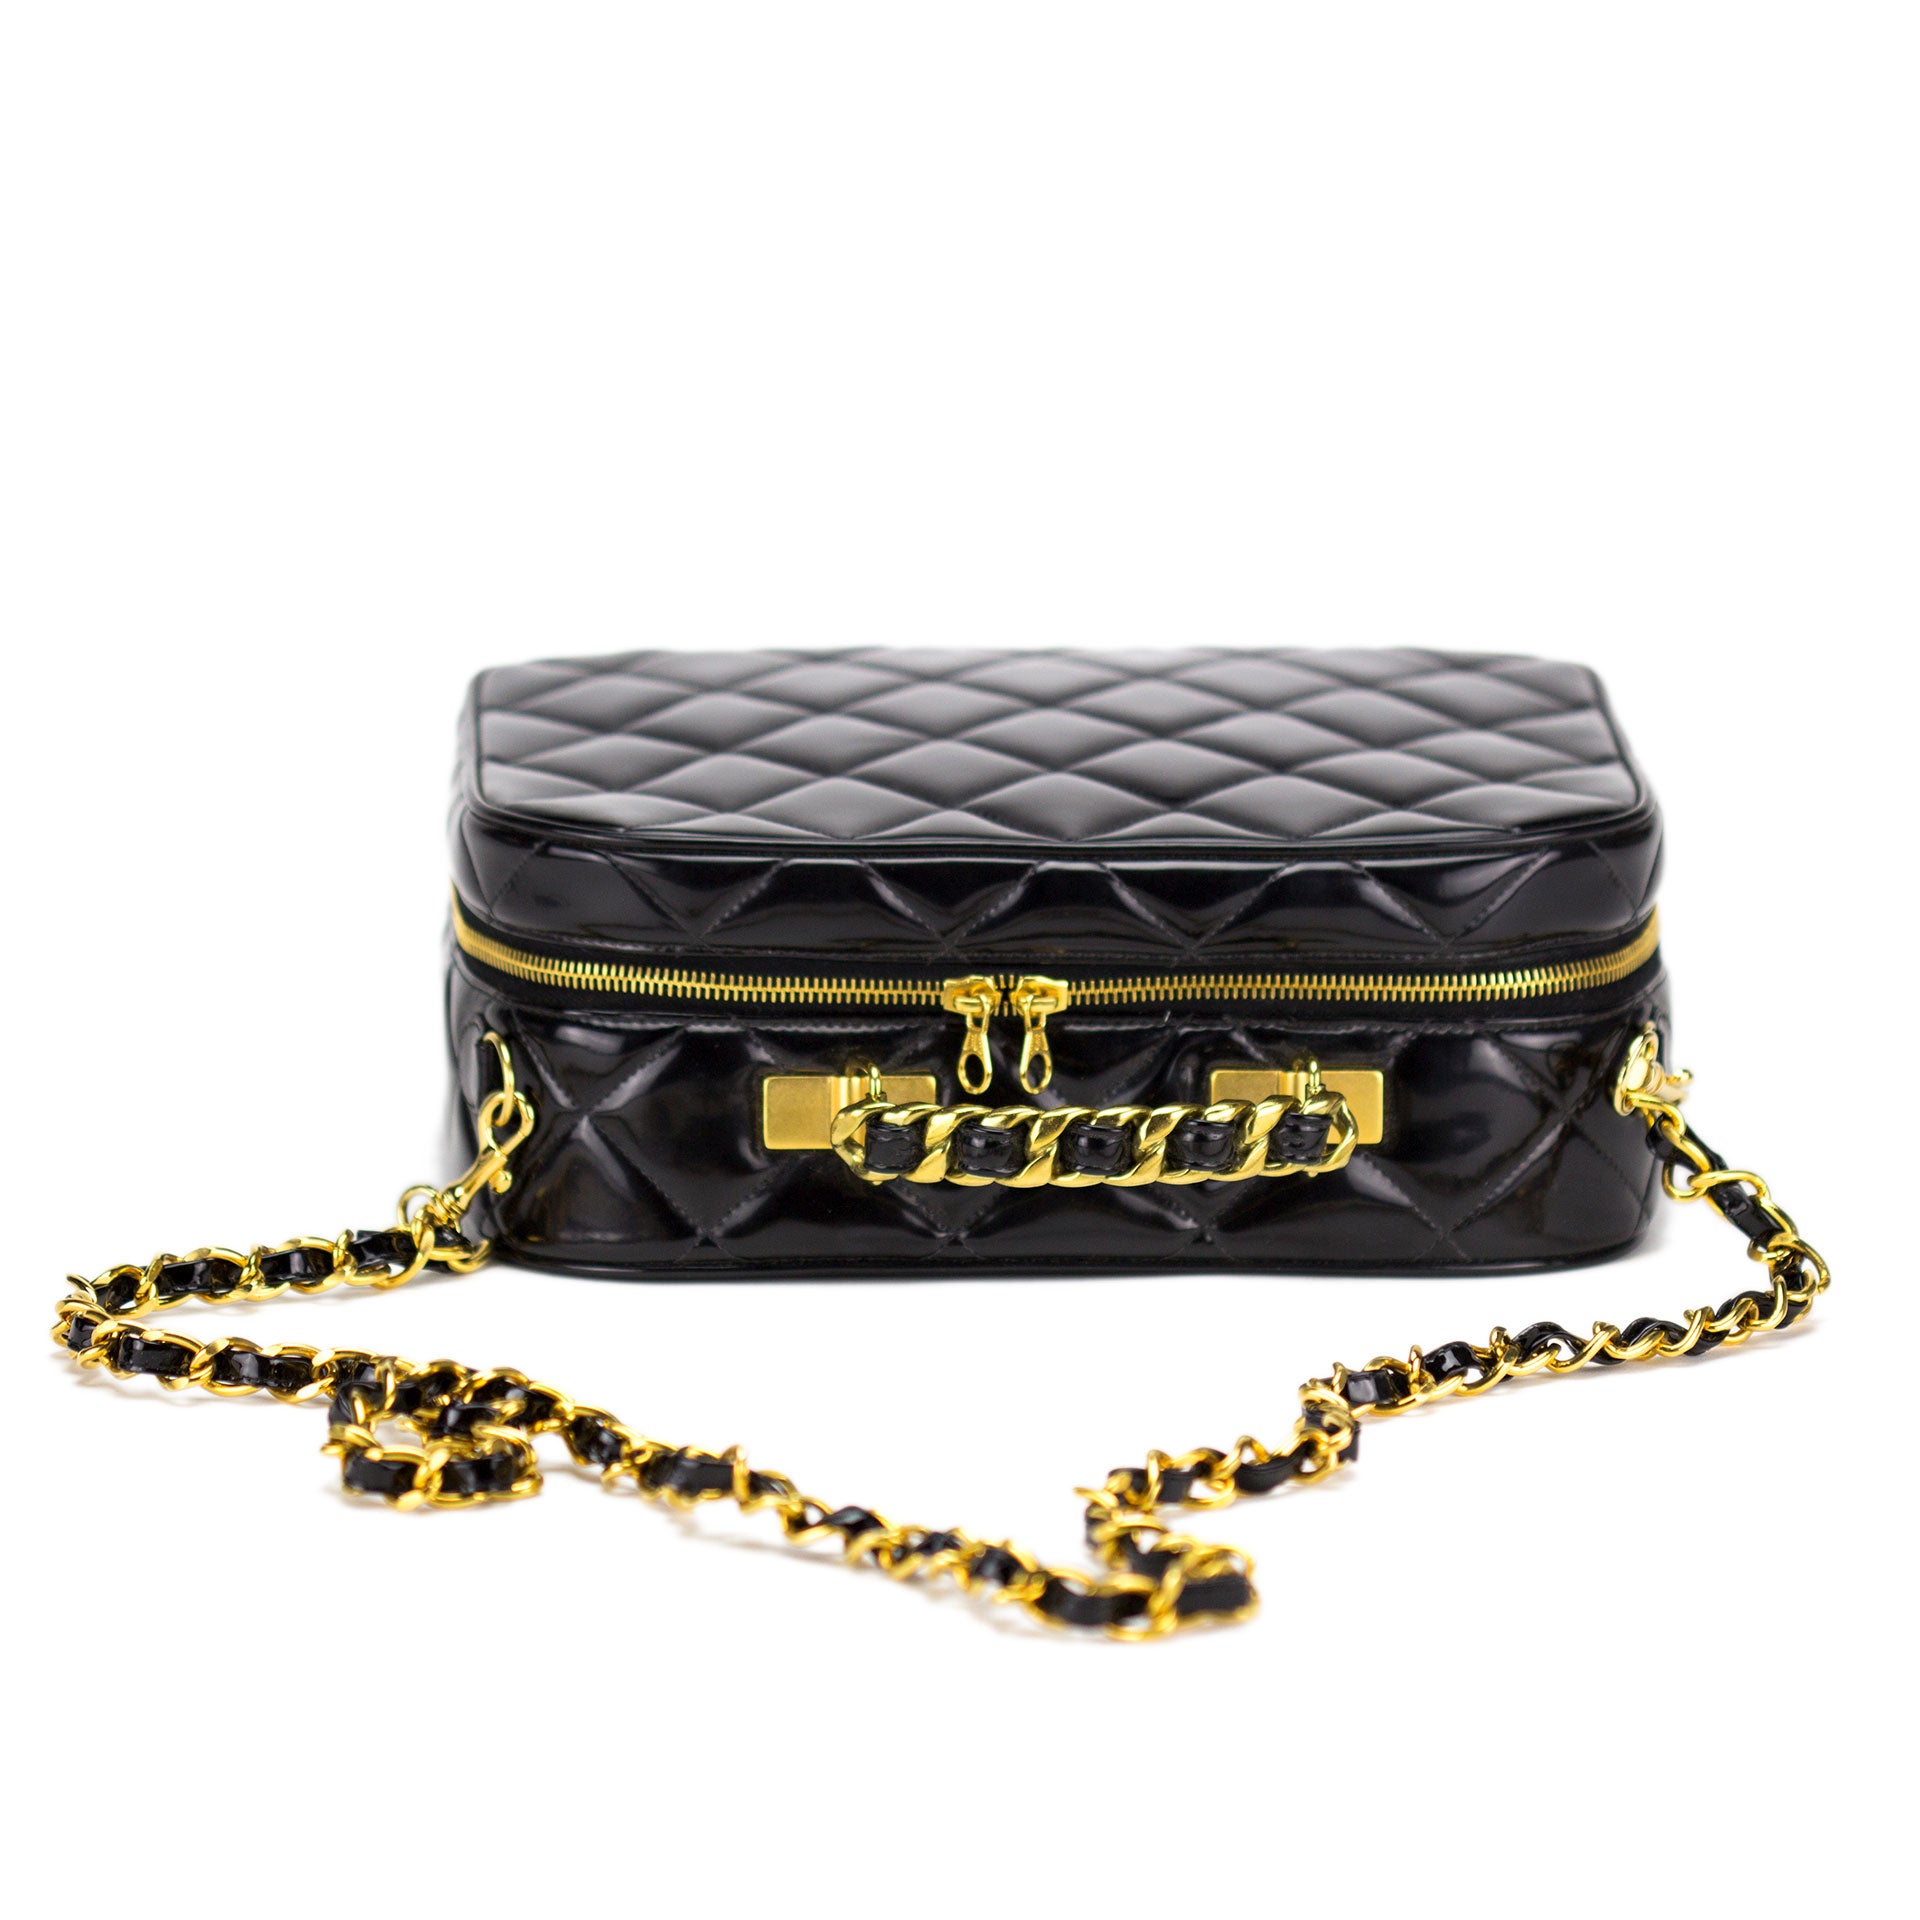 Chanel Vintage Cc Chain Flap Bag Quilted Patent Small